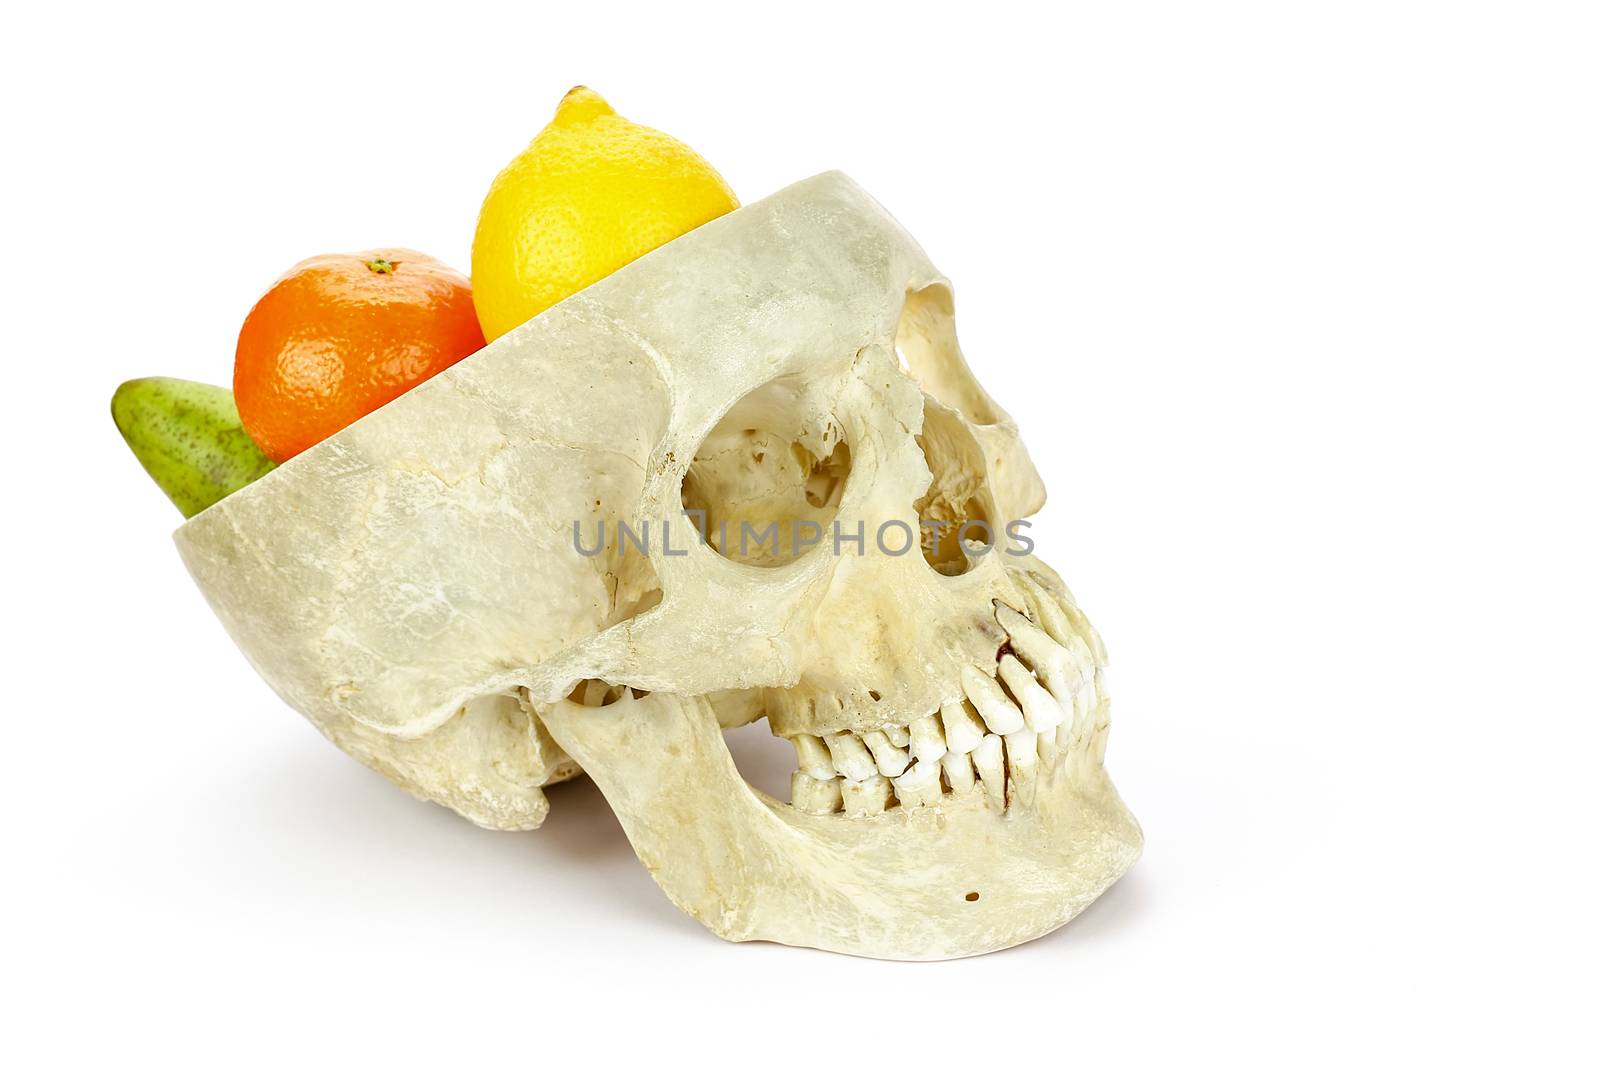 Human skull as fruit scale by BenSchonewille